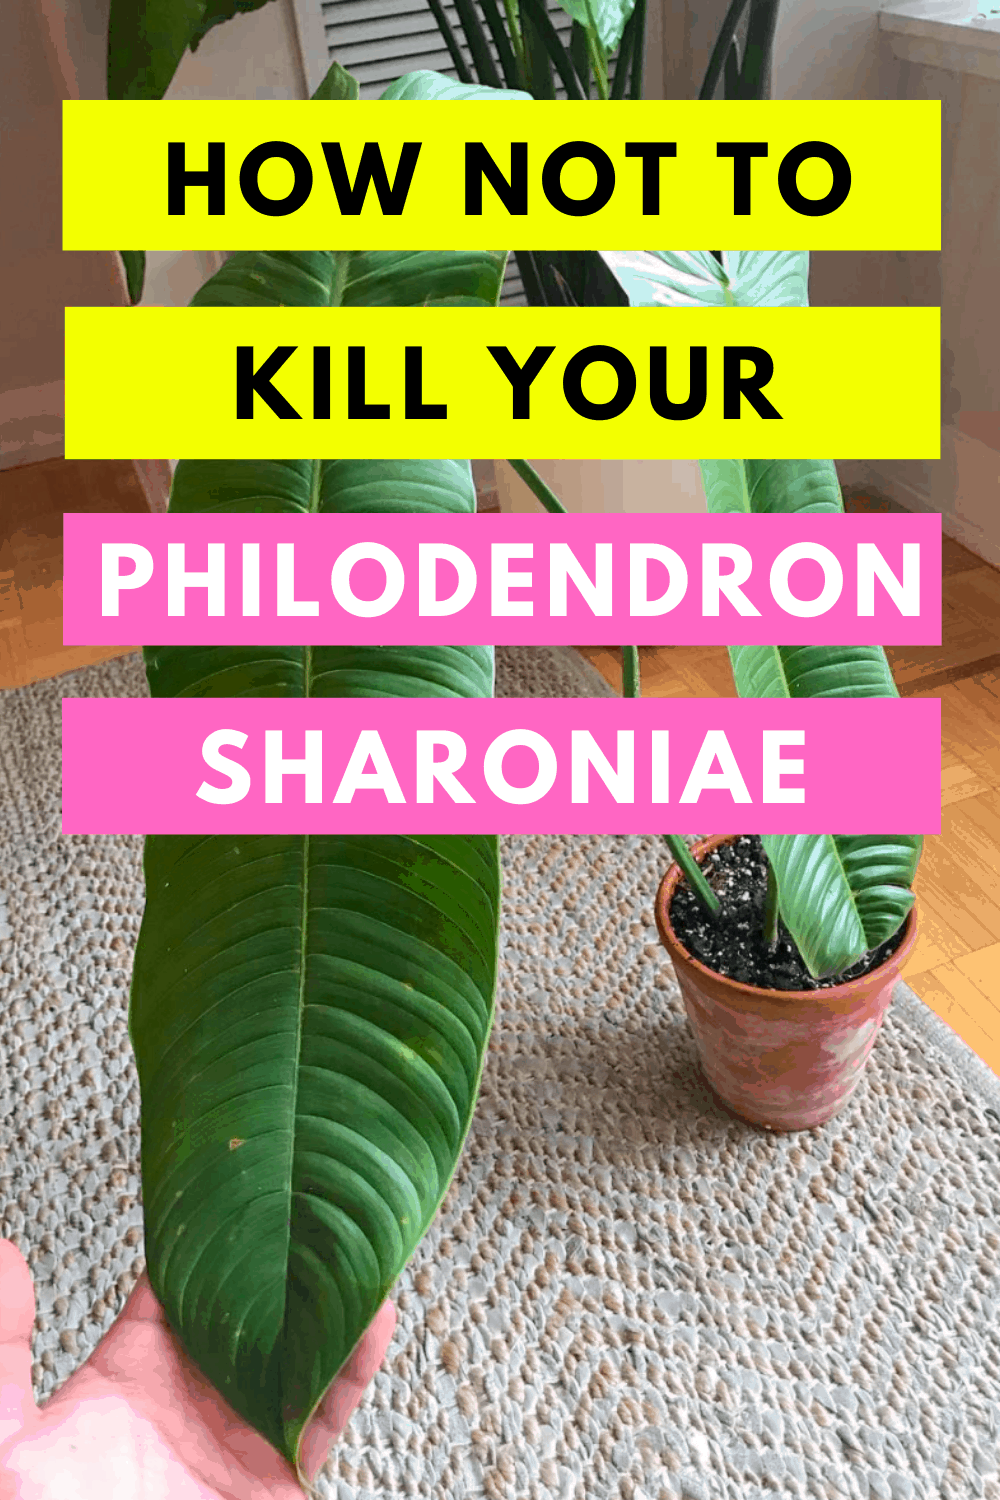 Philodendron Sharoniae Care in a Nutshell 1